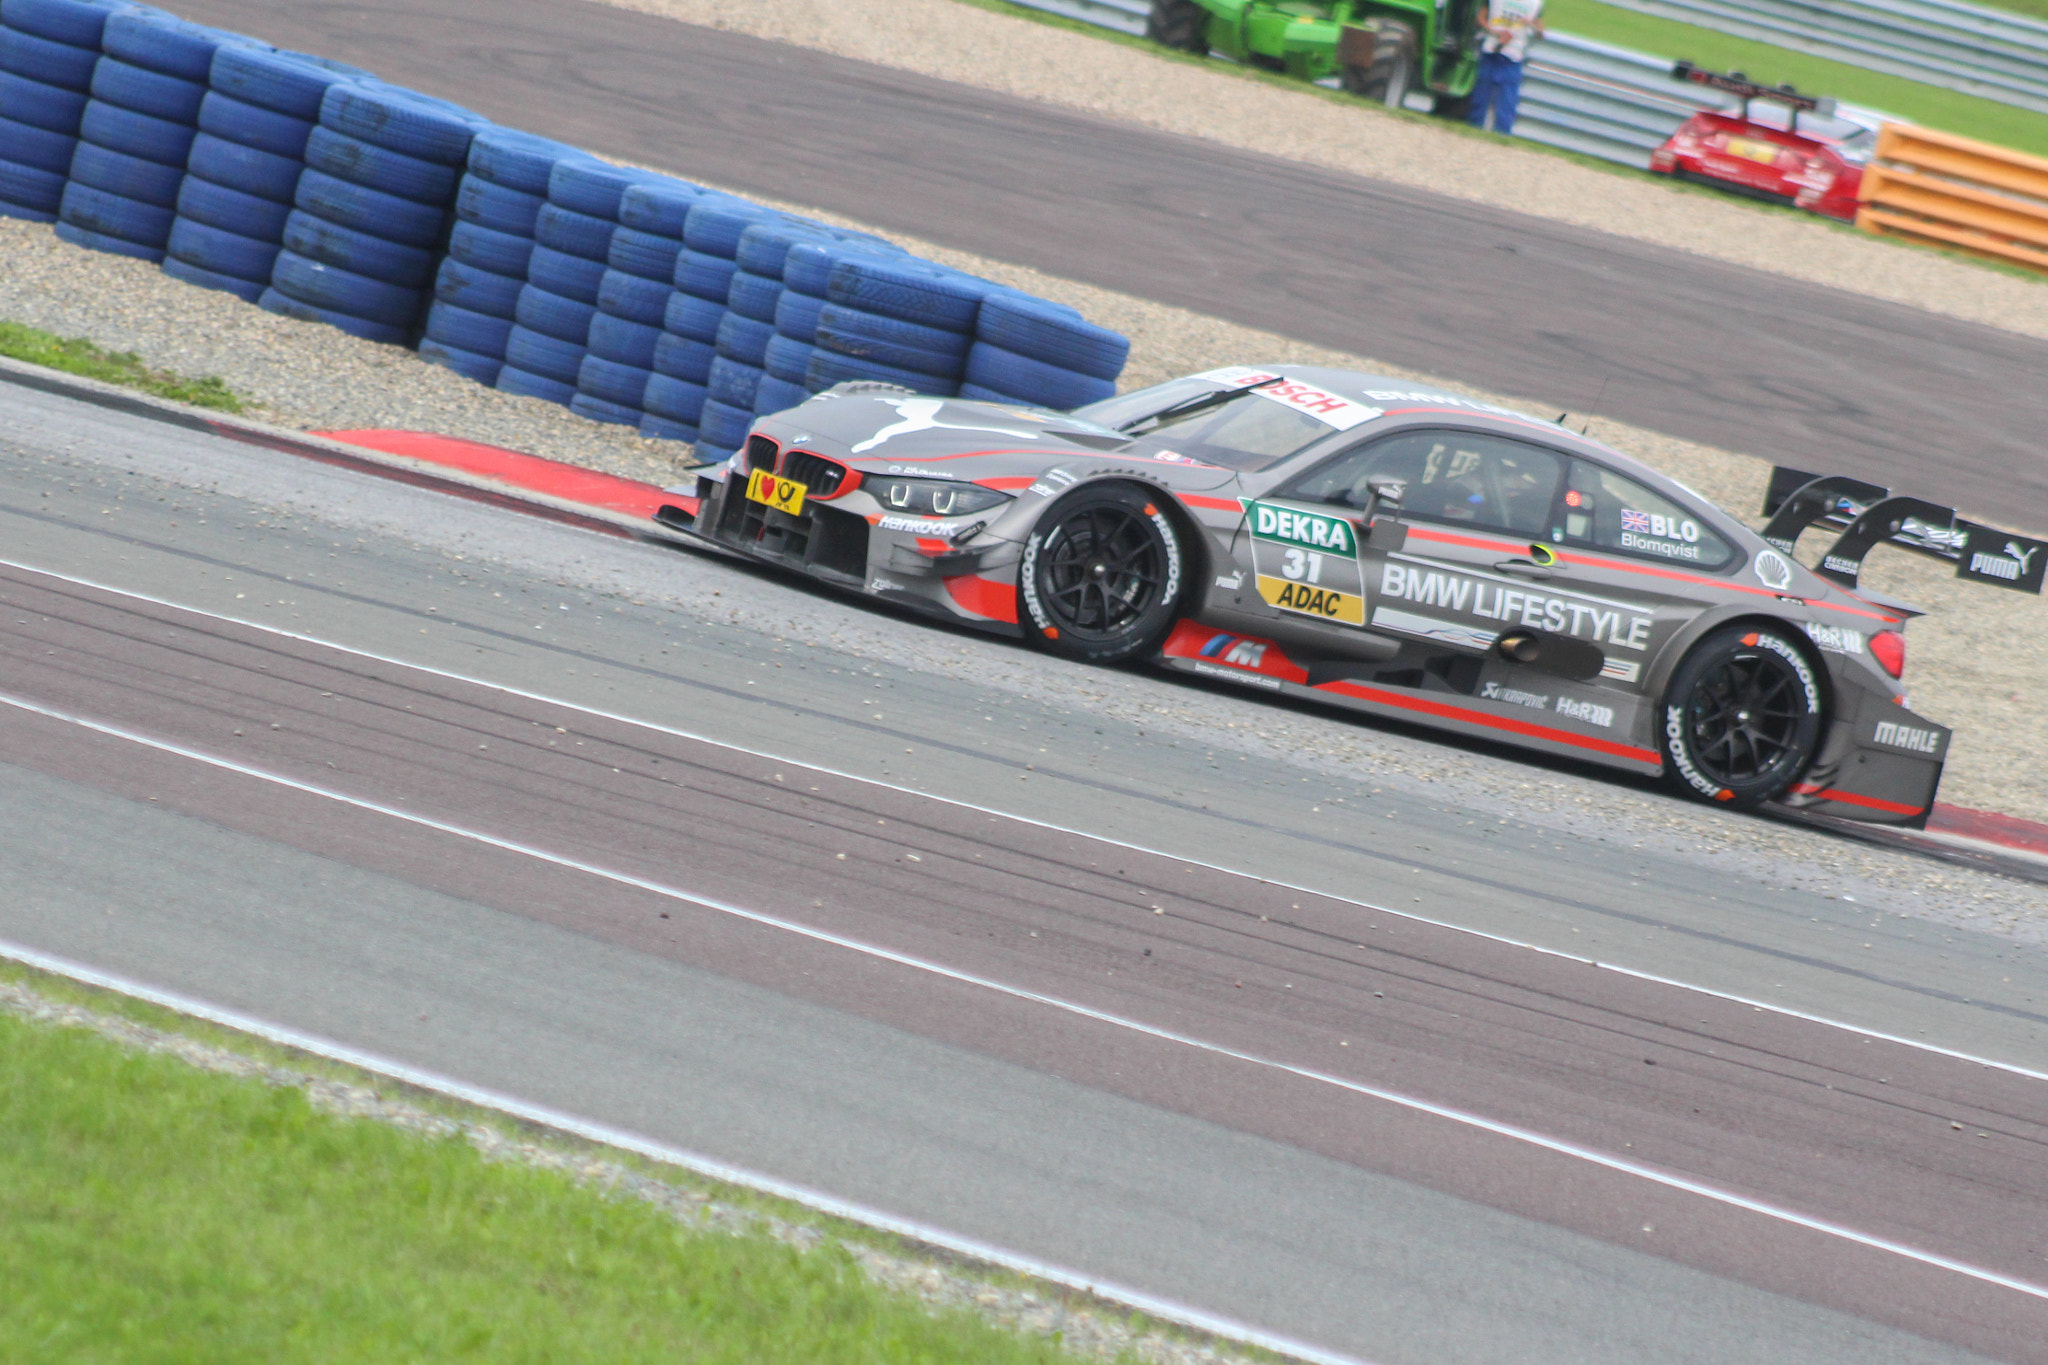 Canon EOS 100D (EOS Rebel SL1 / EOS Kiss X7) sample photo. Dtm oschersleben 2015 - tom blomqvist was really inspired this weekend photography